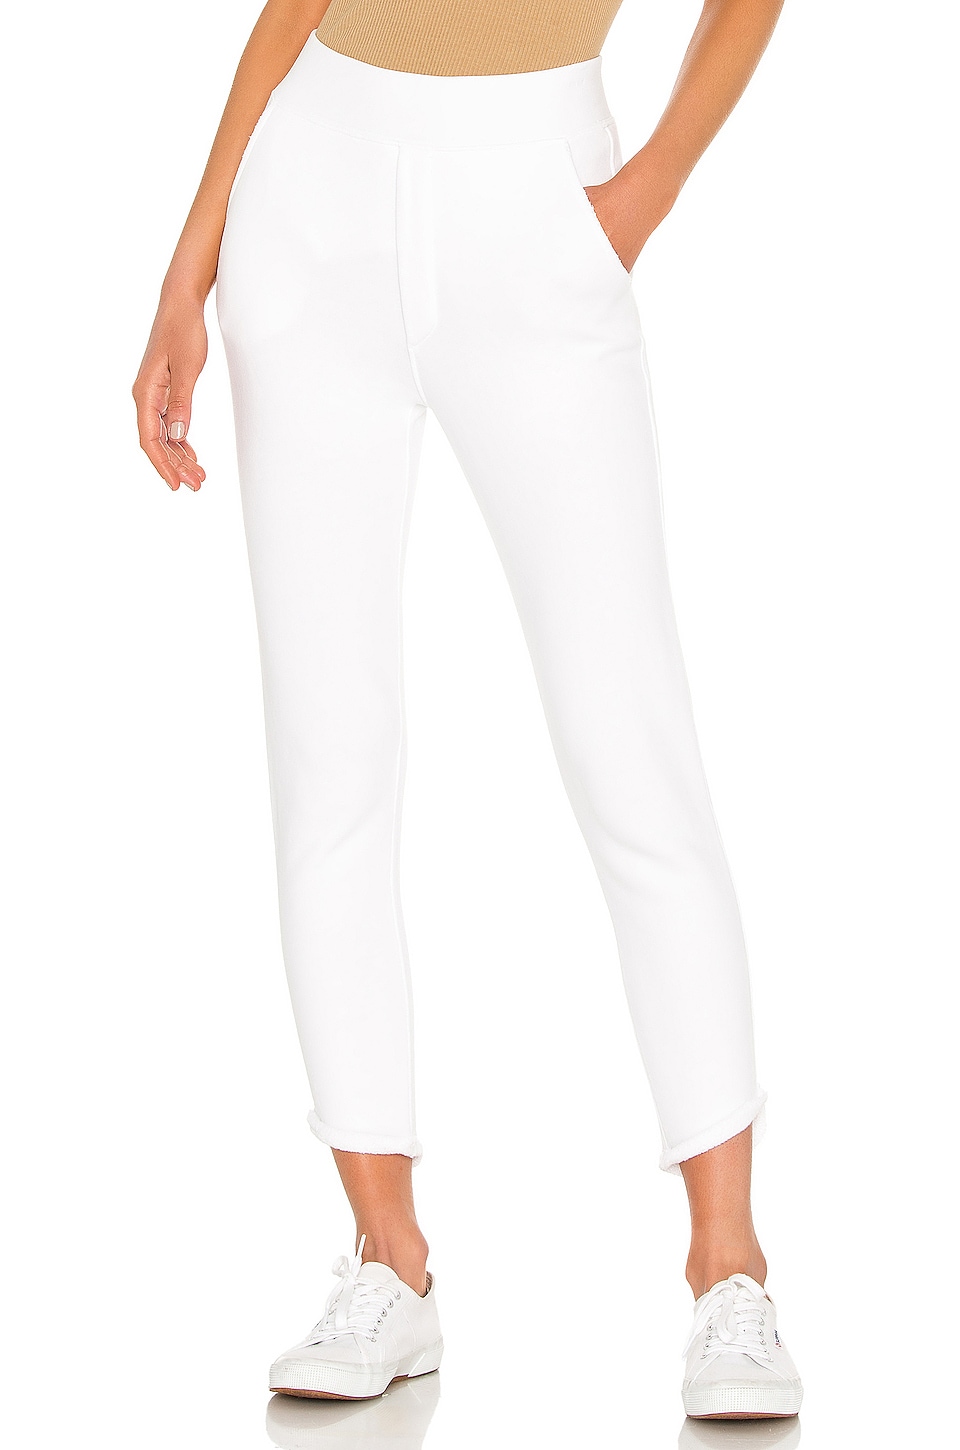 Frank & Eileen Tulip Ankle Sweatpant in White | REVOLVE